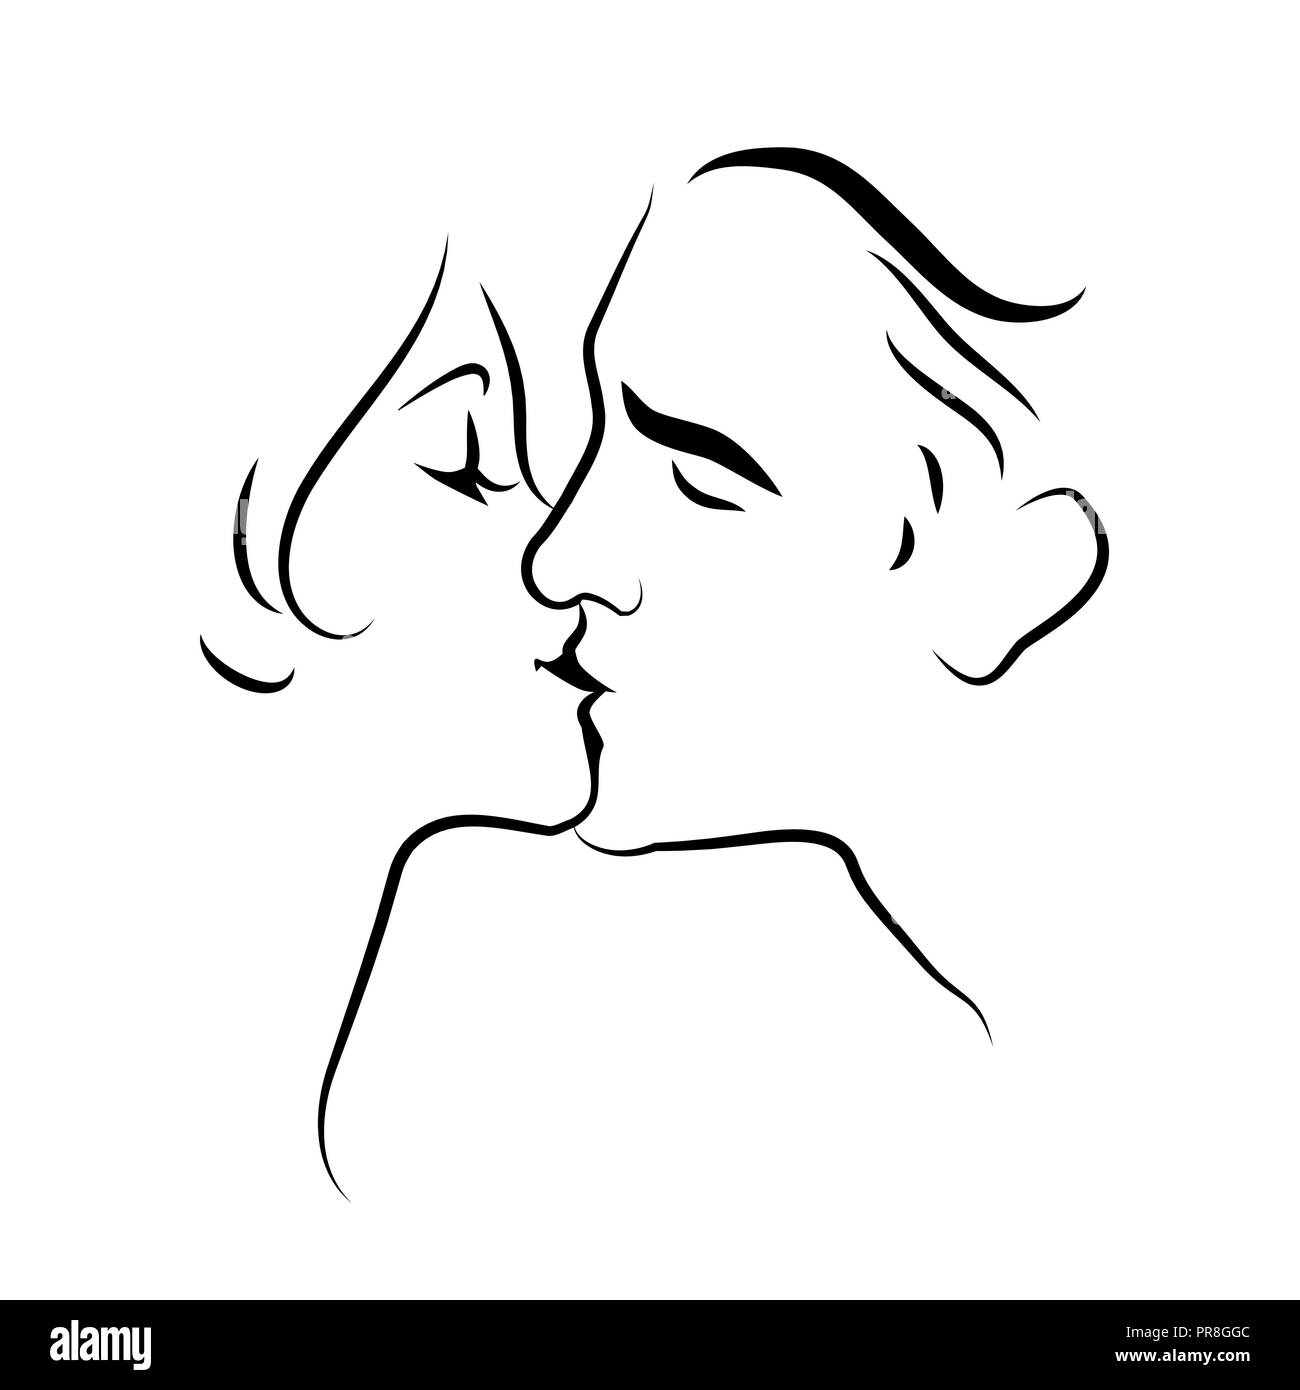 Pics For > Drawings Of Couples Kissing Tumblr | love | Pinterest ... |  Drawing people, Drawings of people kissing, Couples kissing drawing